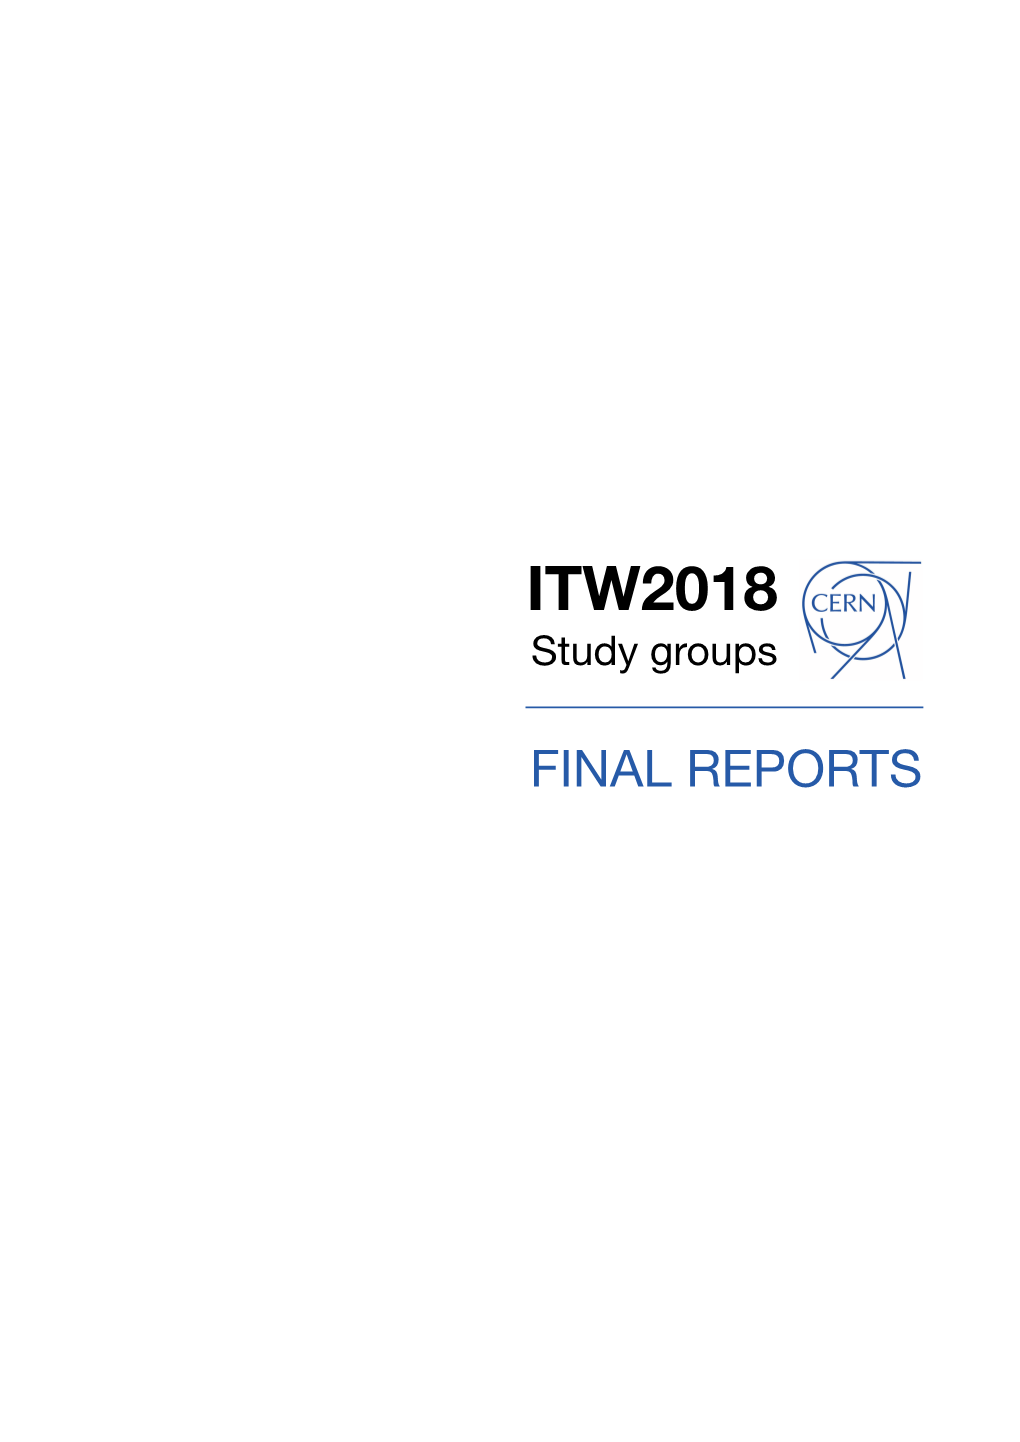 ITW2018 Study Groups